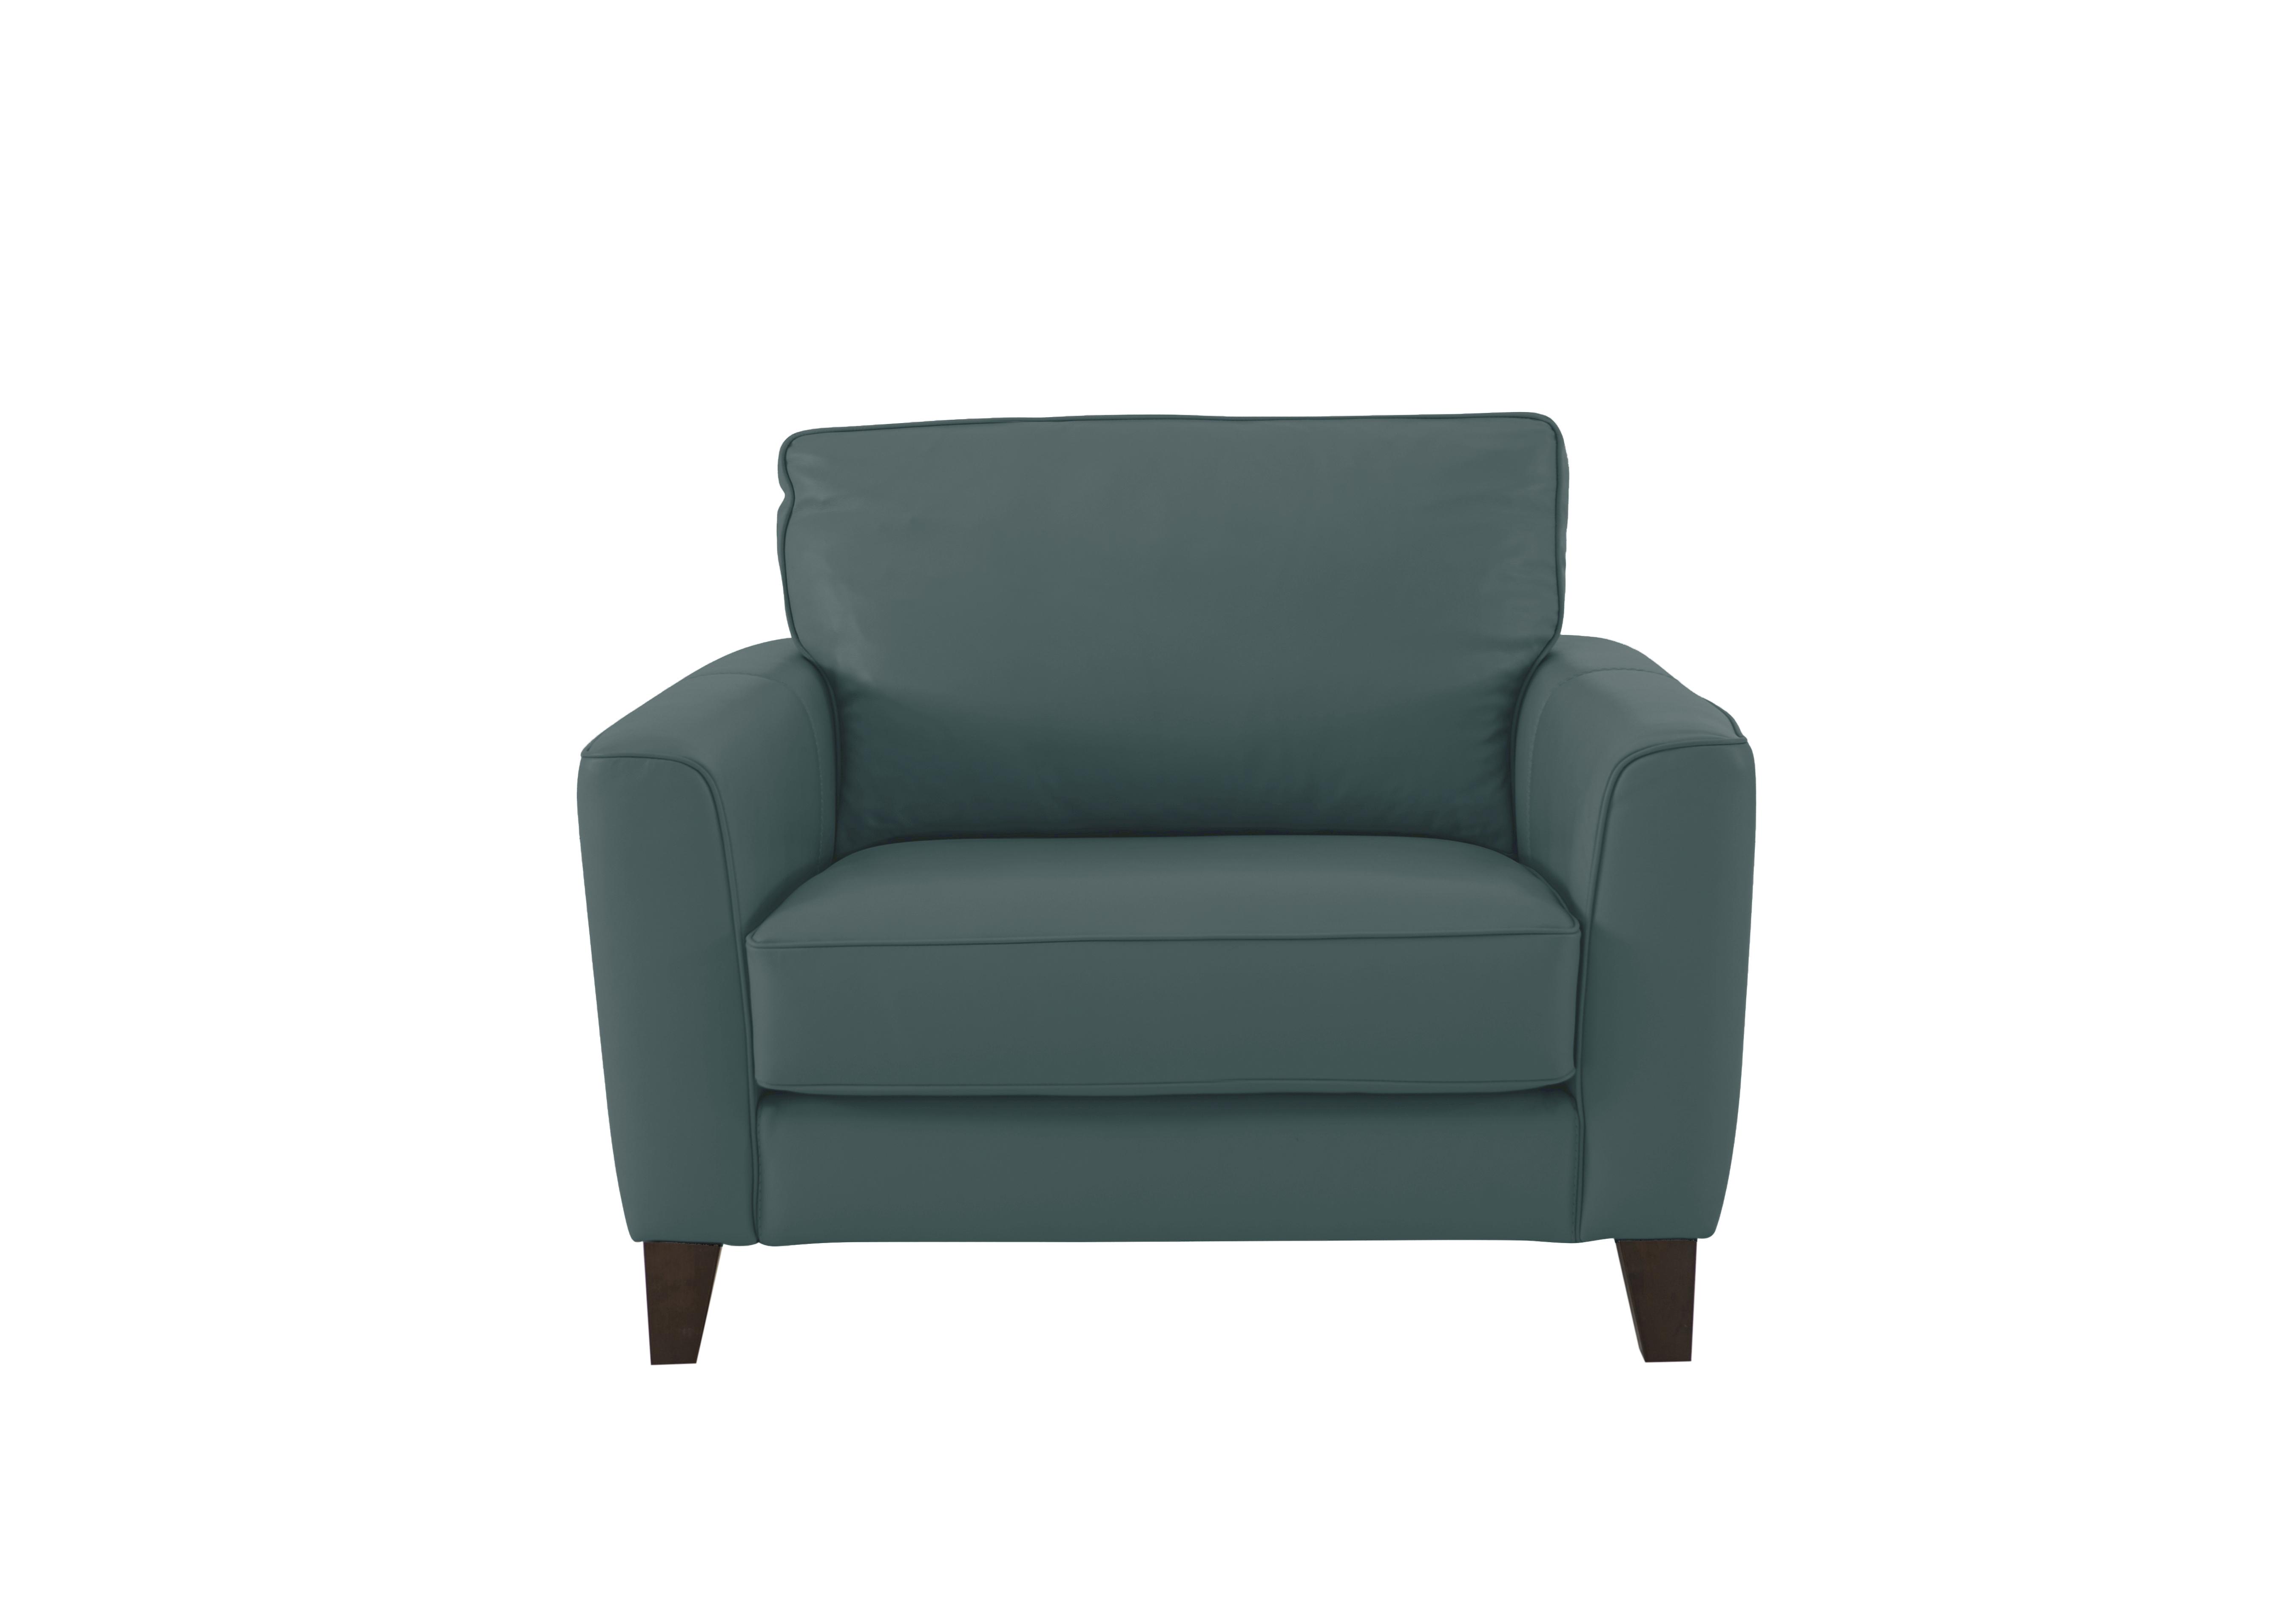 Brondby Leather Cuddle Chair in Bv-301e Lake Green on Furniture Village